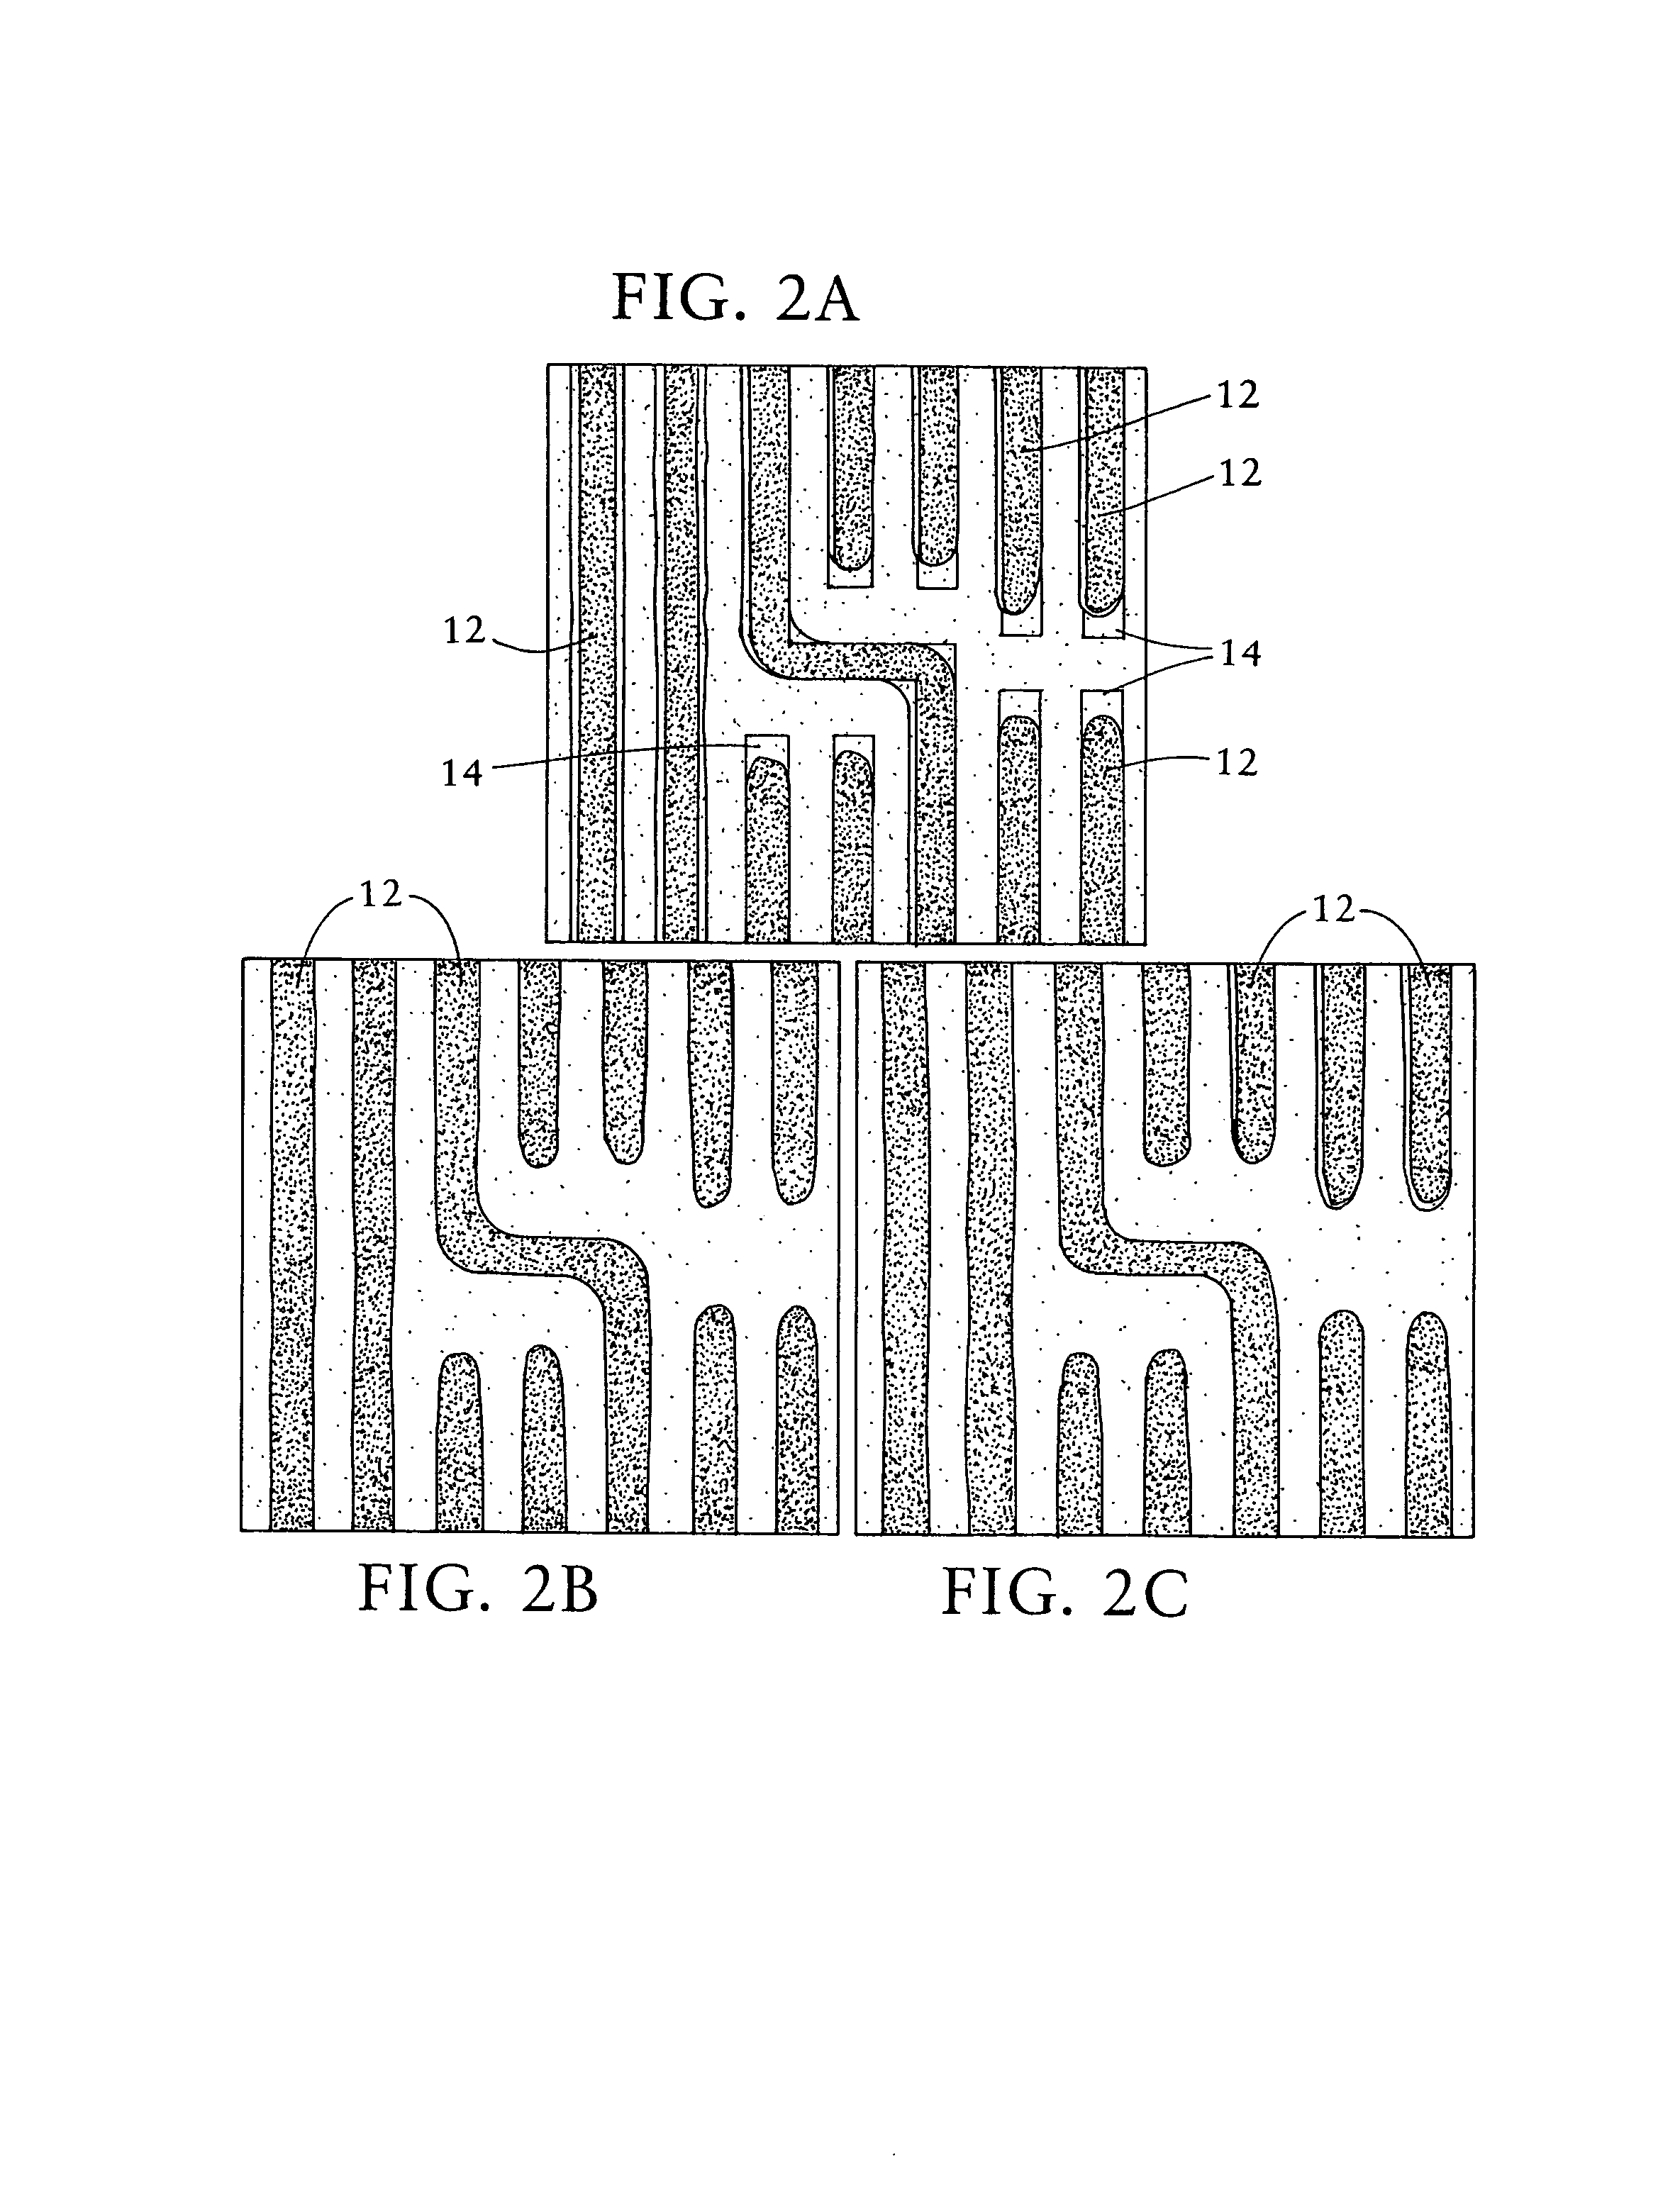 Method of two dimensional feature model calibration and optimization